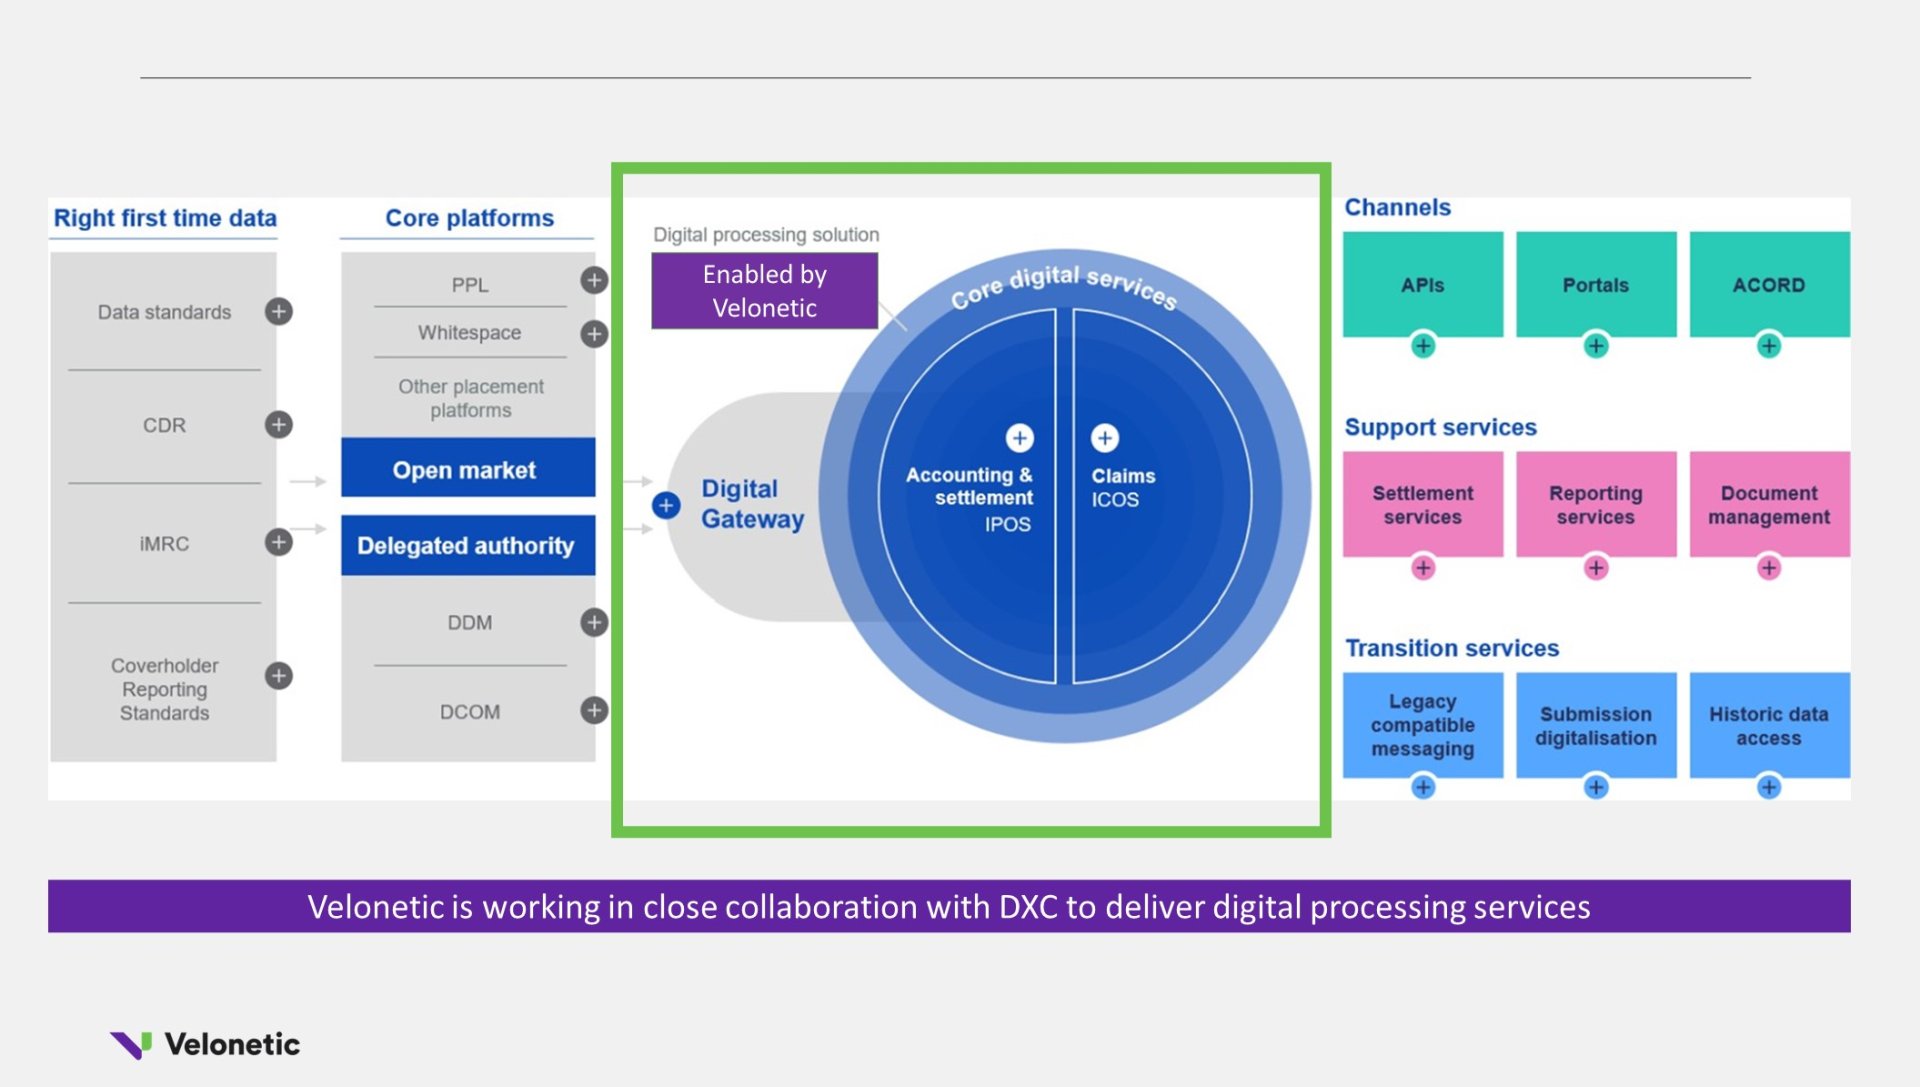 Image of Velonetic's role in digital transformation